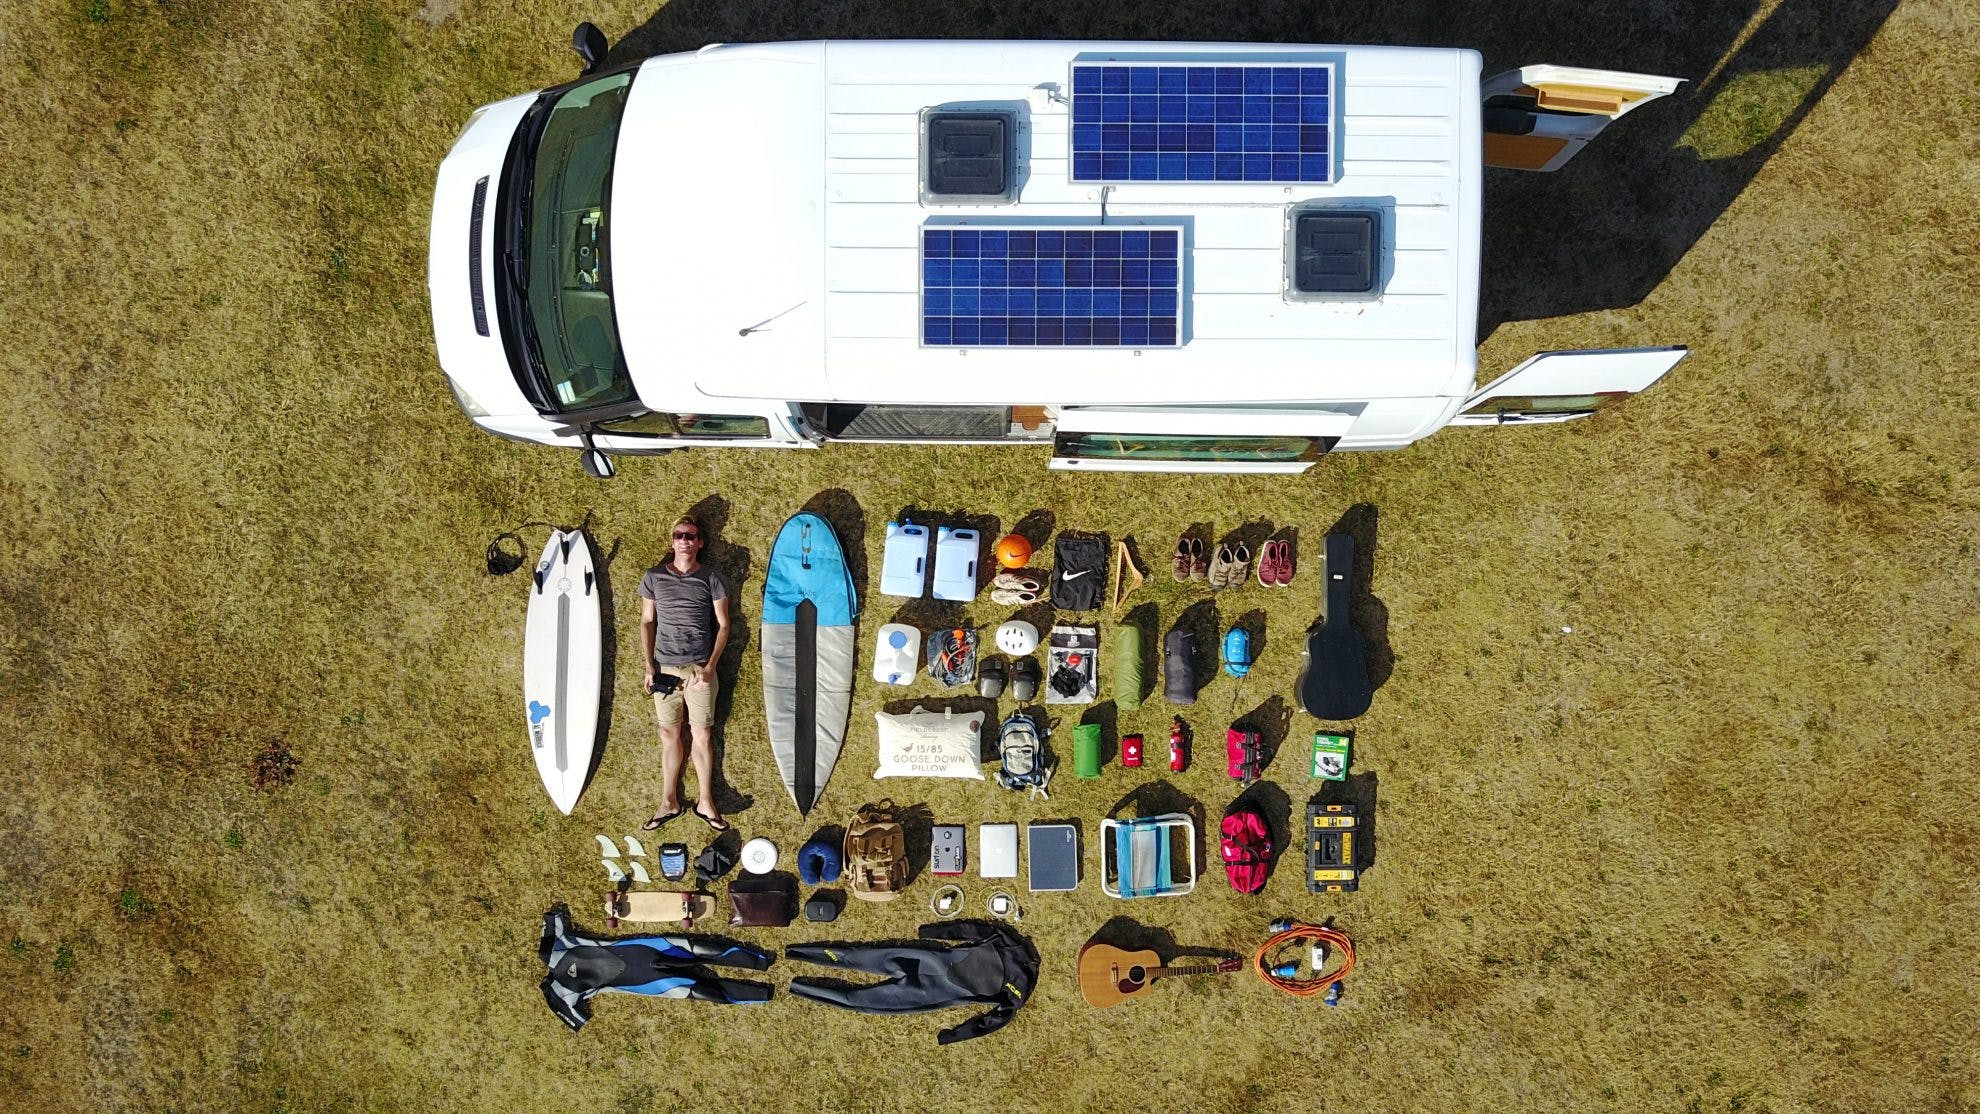 all the contents of a person's items in a van, shown outside of the van for perspective exemplifying minimalist nature of vanlife